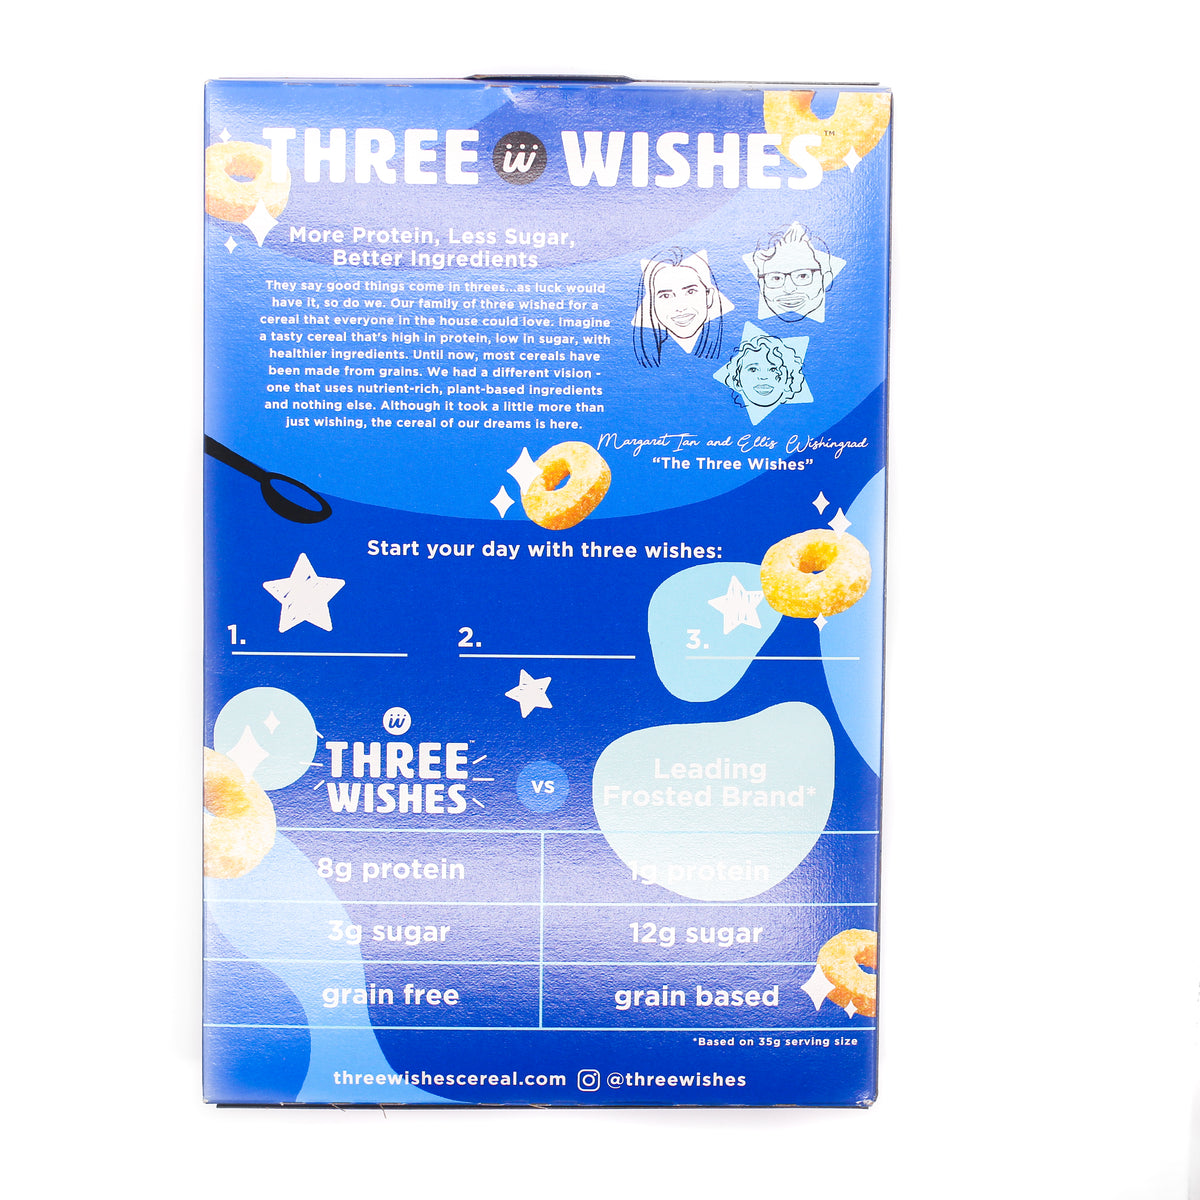 Three Wishes Frosted